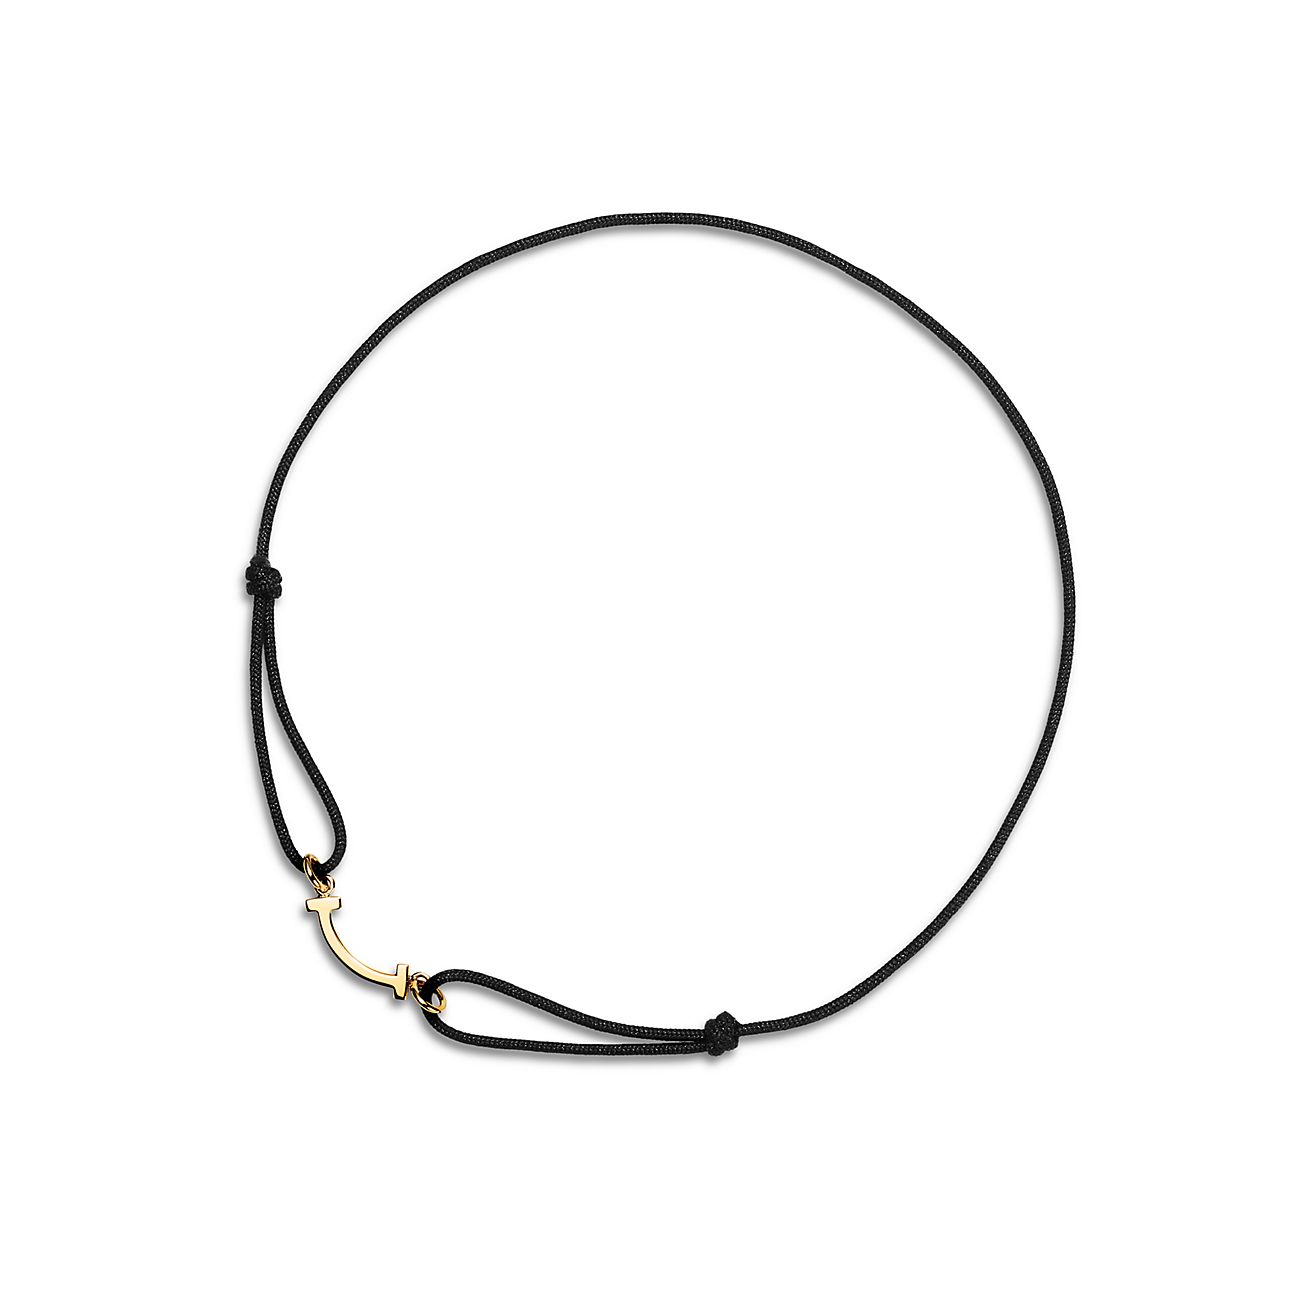 Tiffany T Smile Bracelet in Yellow Gold on A Black Cord, Size: Medium to Extra Large